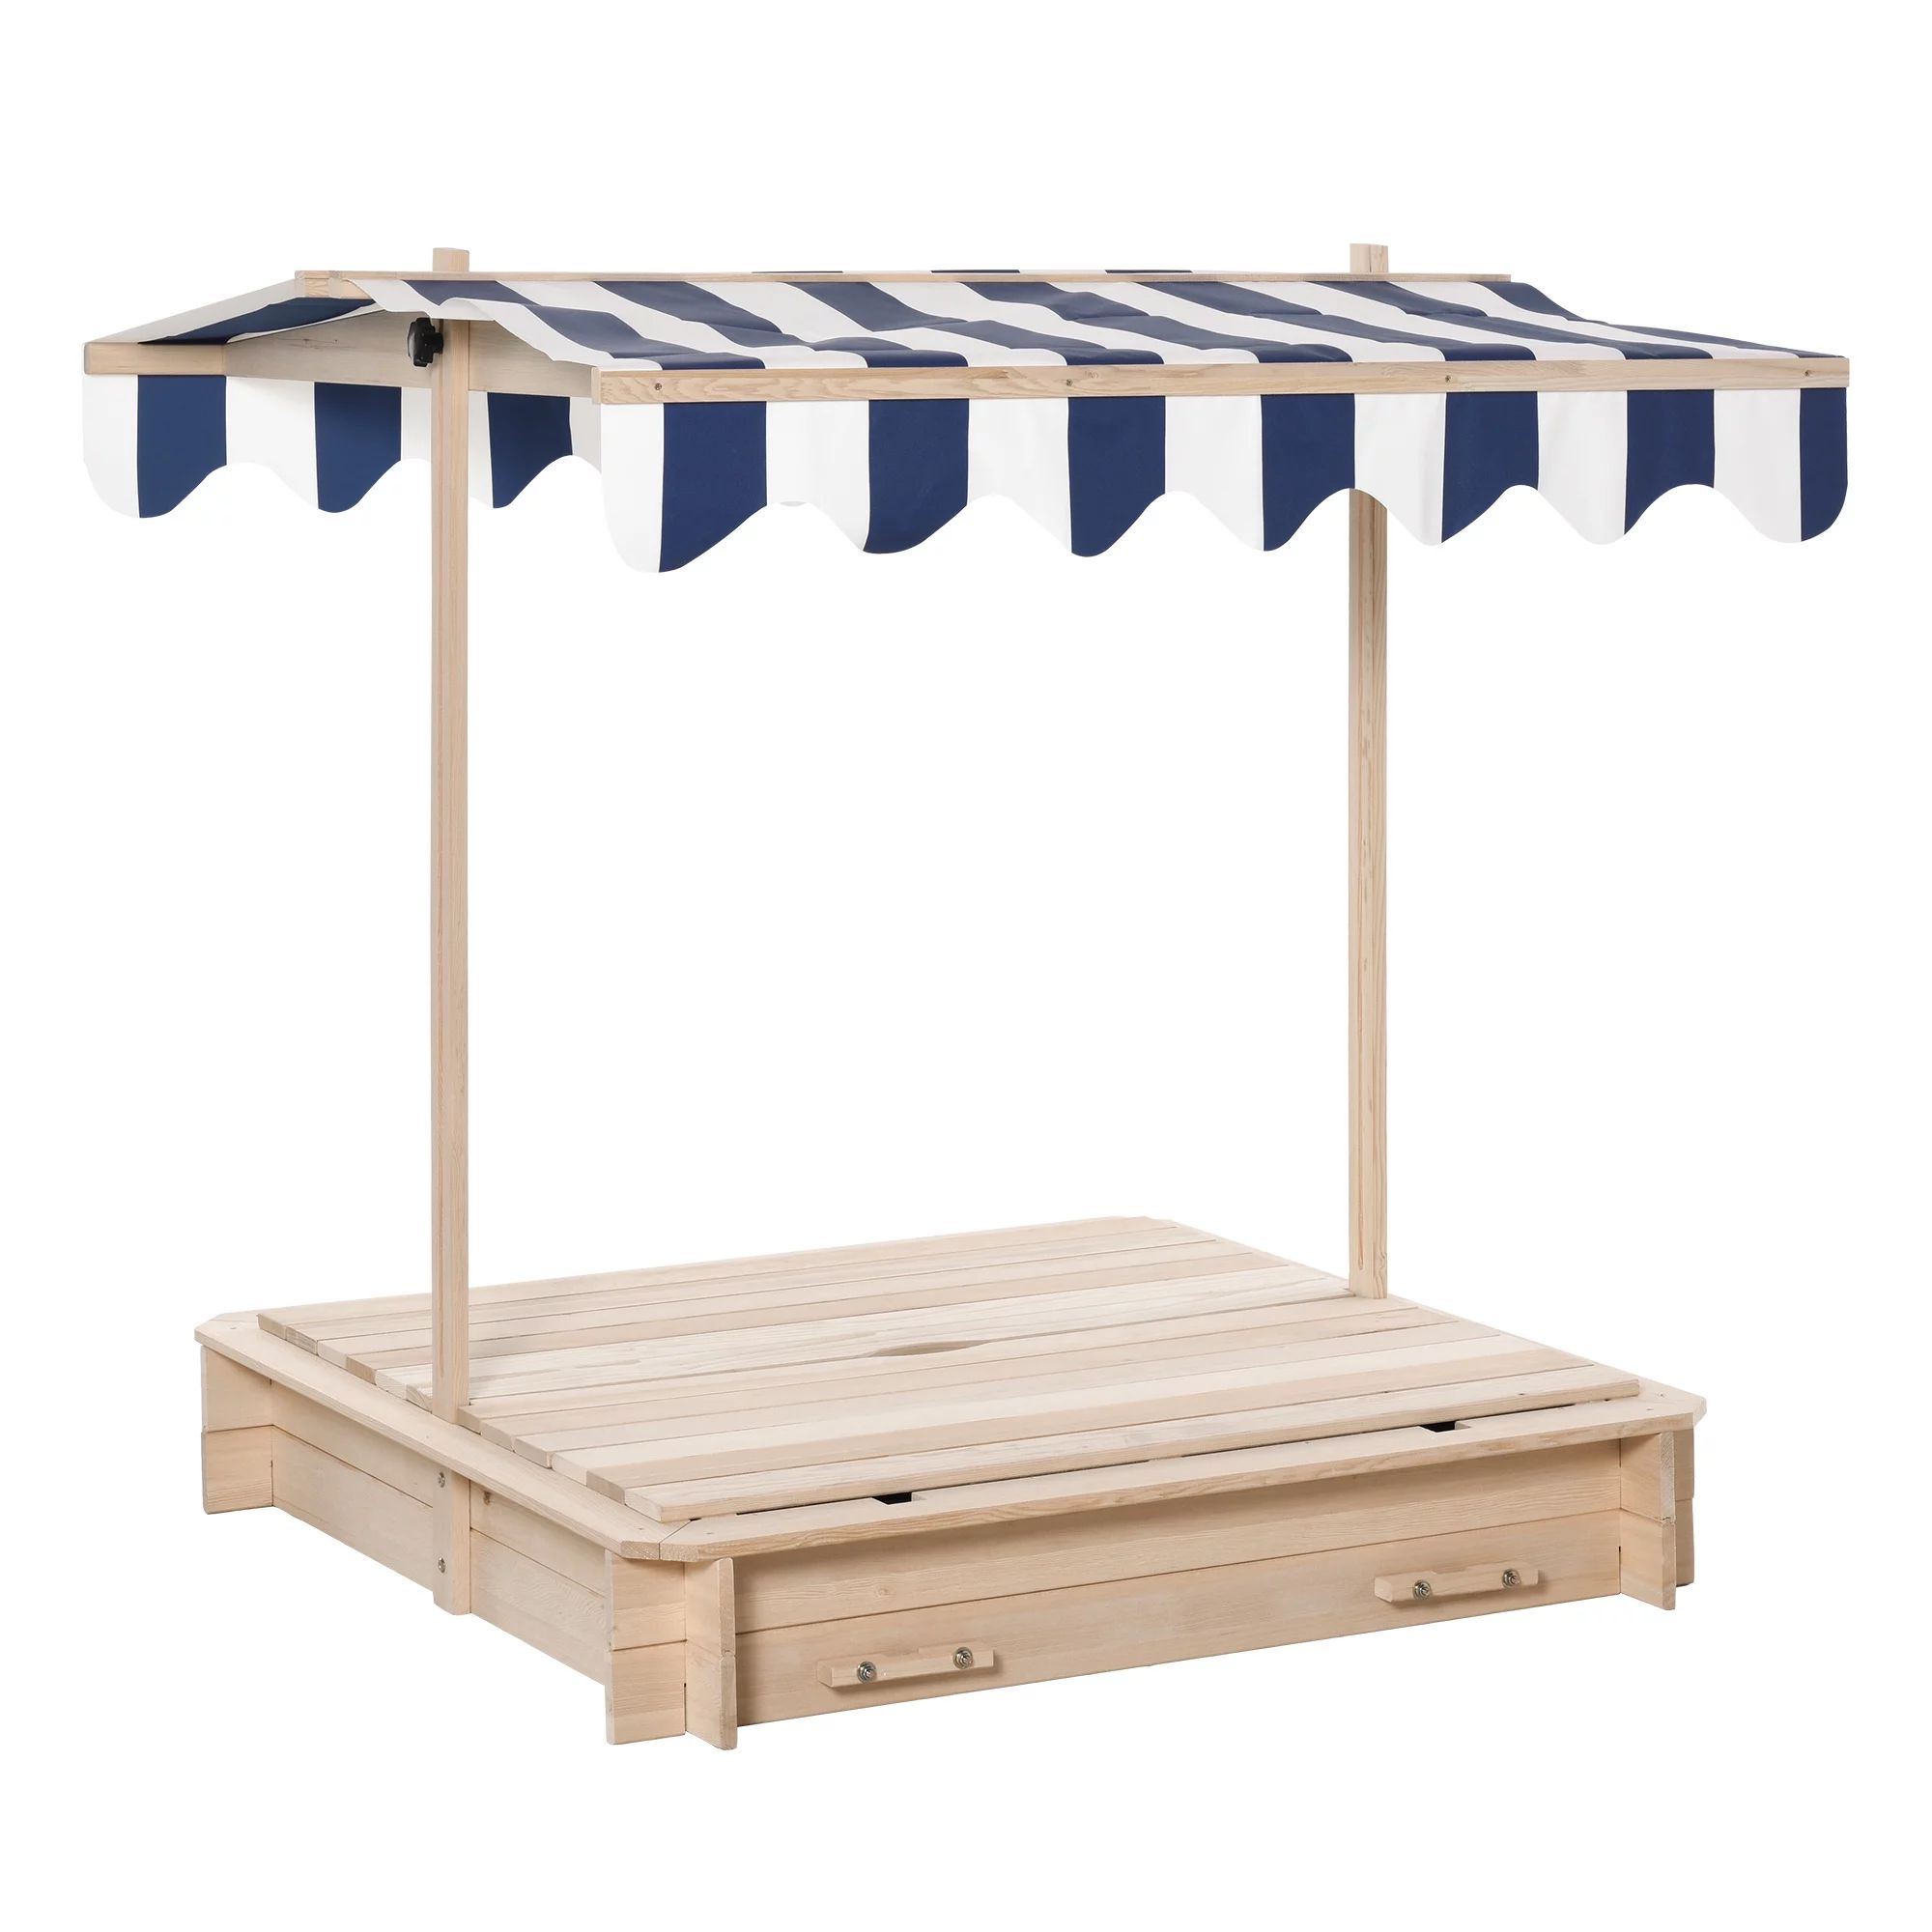 Outsunny Wooden Kids Sandbox w/ Cover Adjustable Canopy Convertible Bench Seat Bottom Liner - Wal... | Walmart Online Grocery